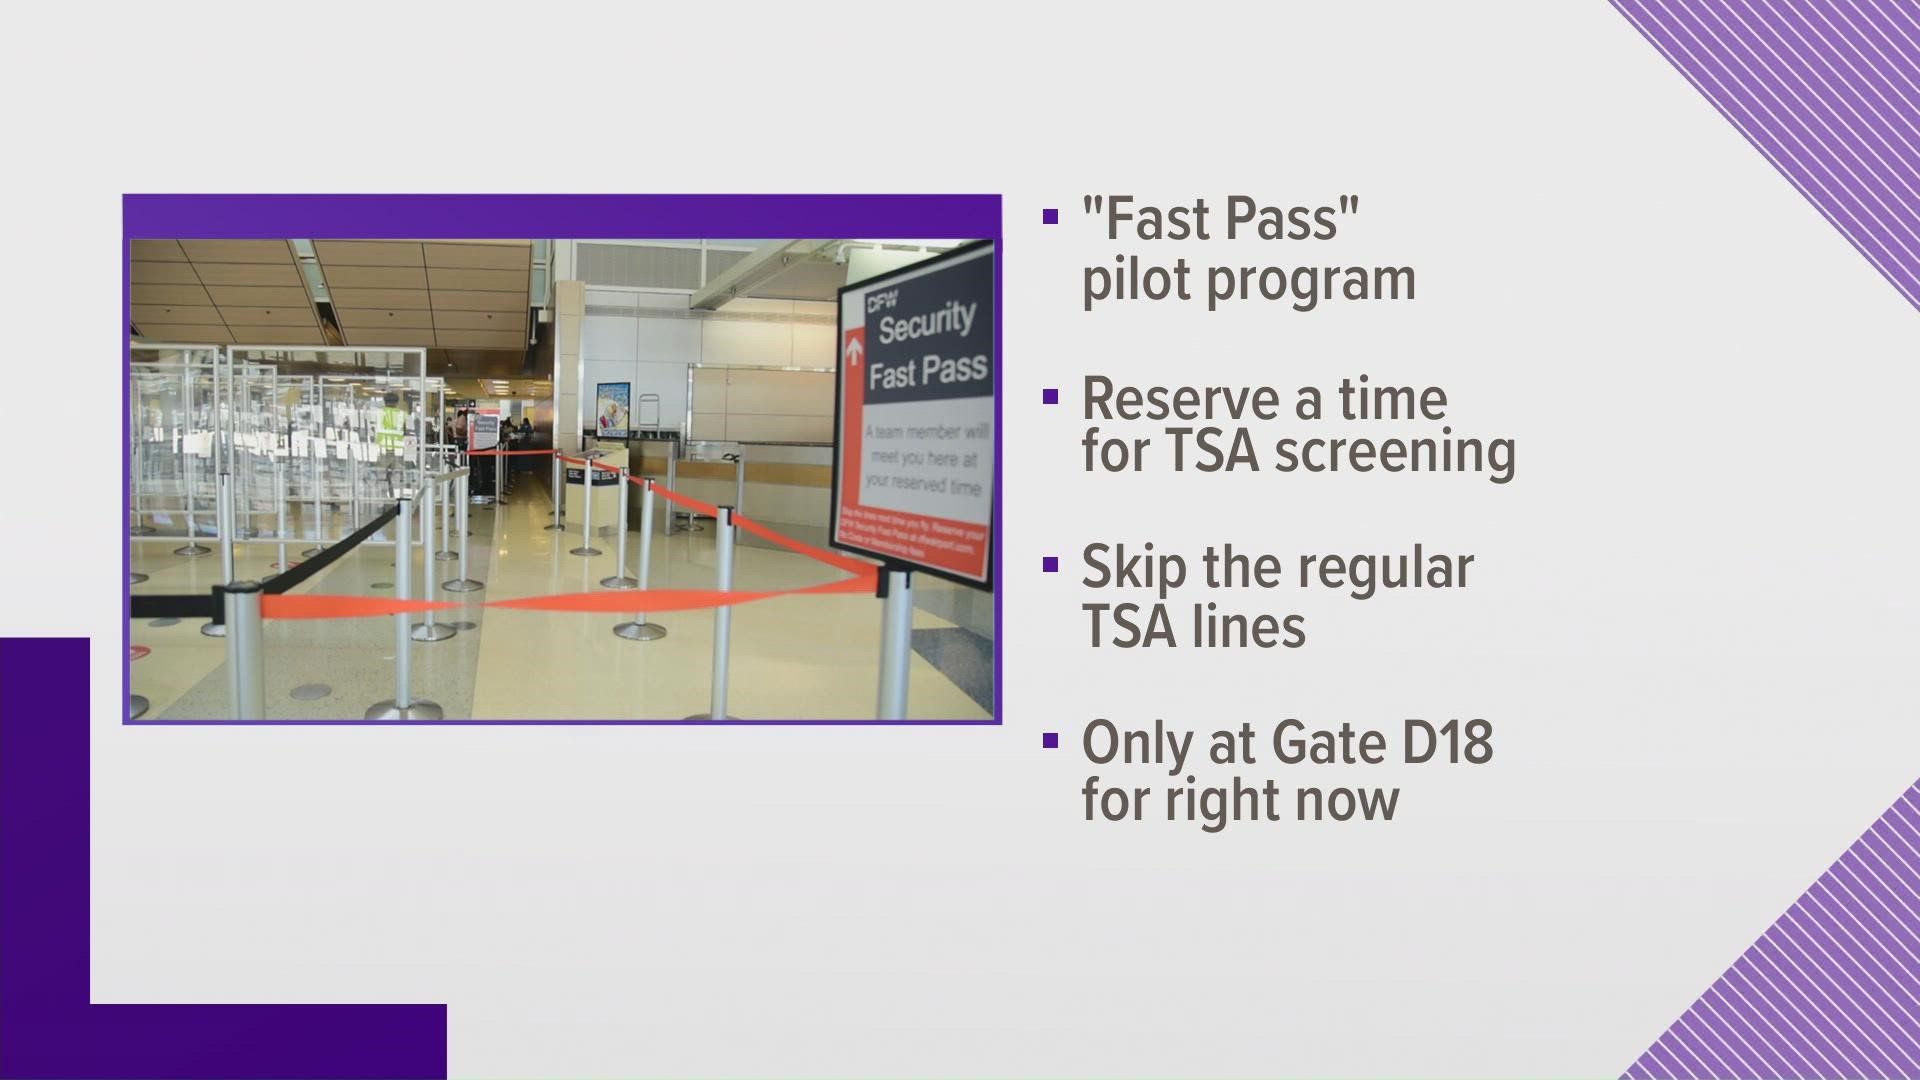 Travelers will now be able to reserve a time to arrive for screening, bypassing the line.